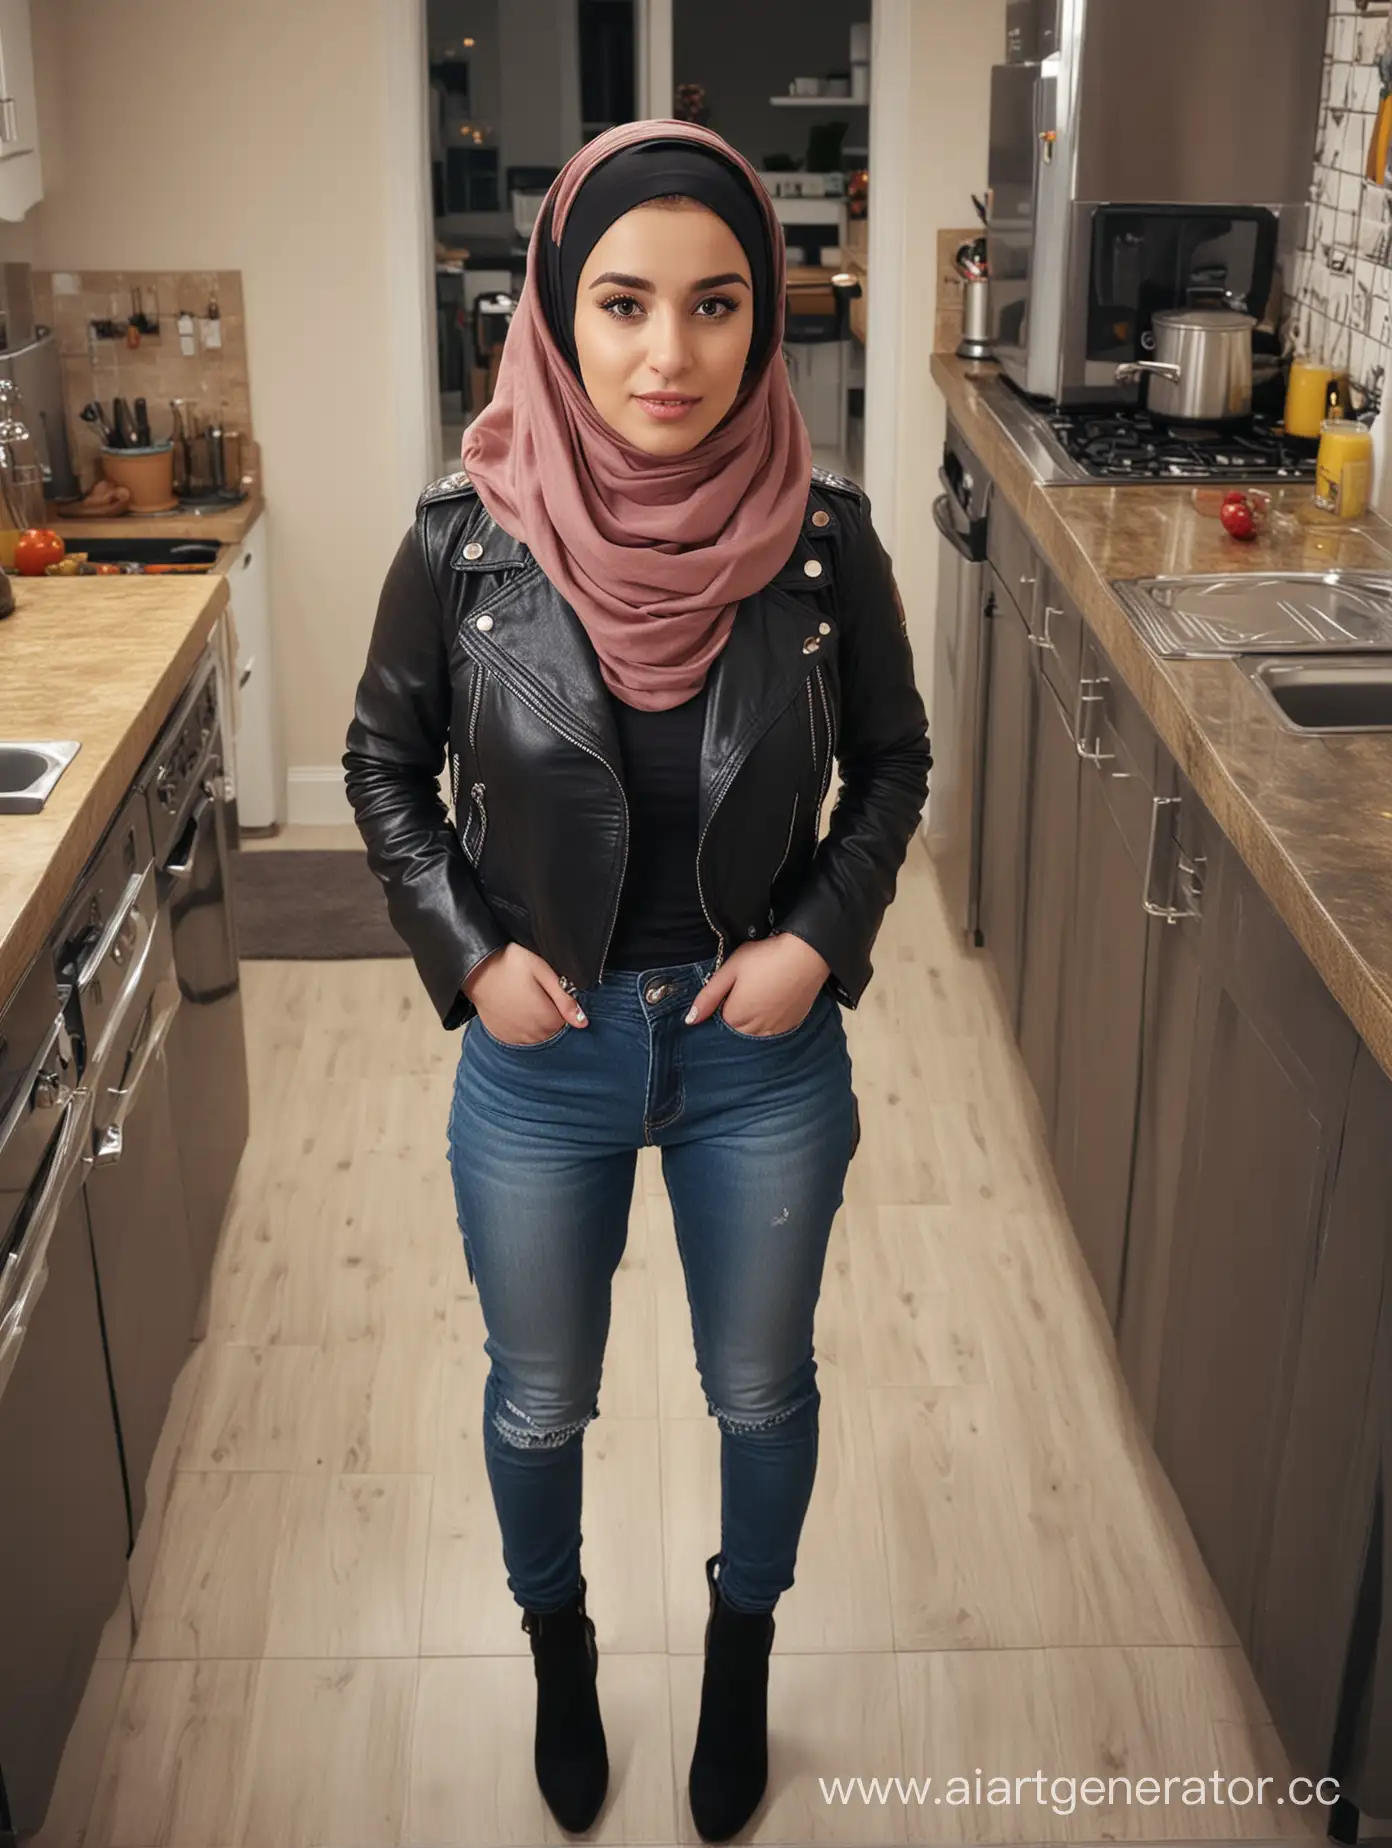 25YearOld-Dwarf-Girl-in-Trendy-Hijab-and-Leather-Jacket-Posing-in-Kitchen